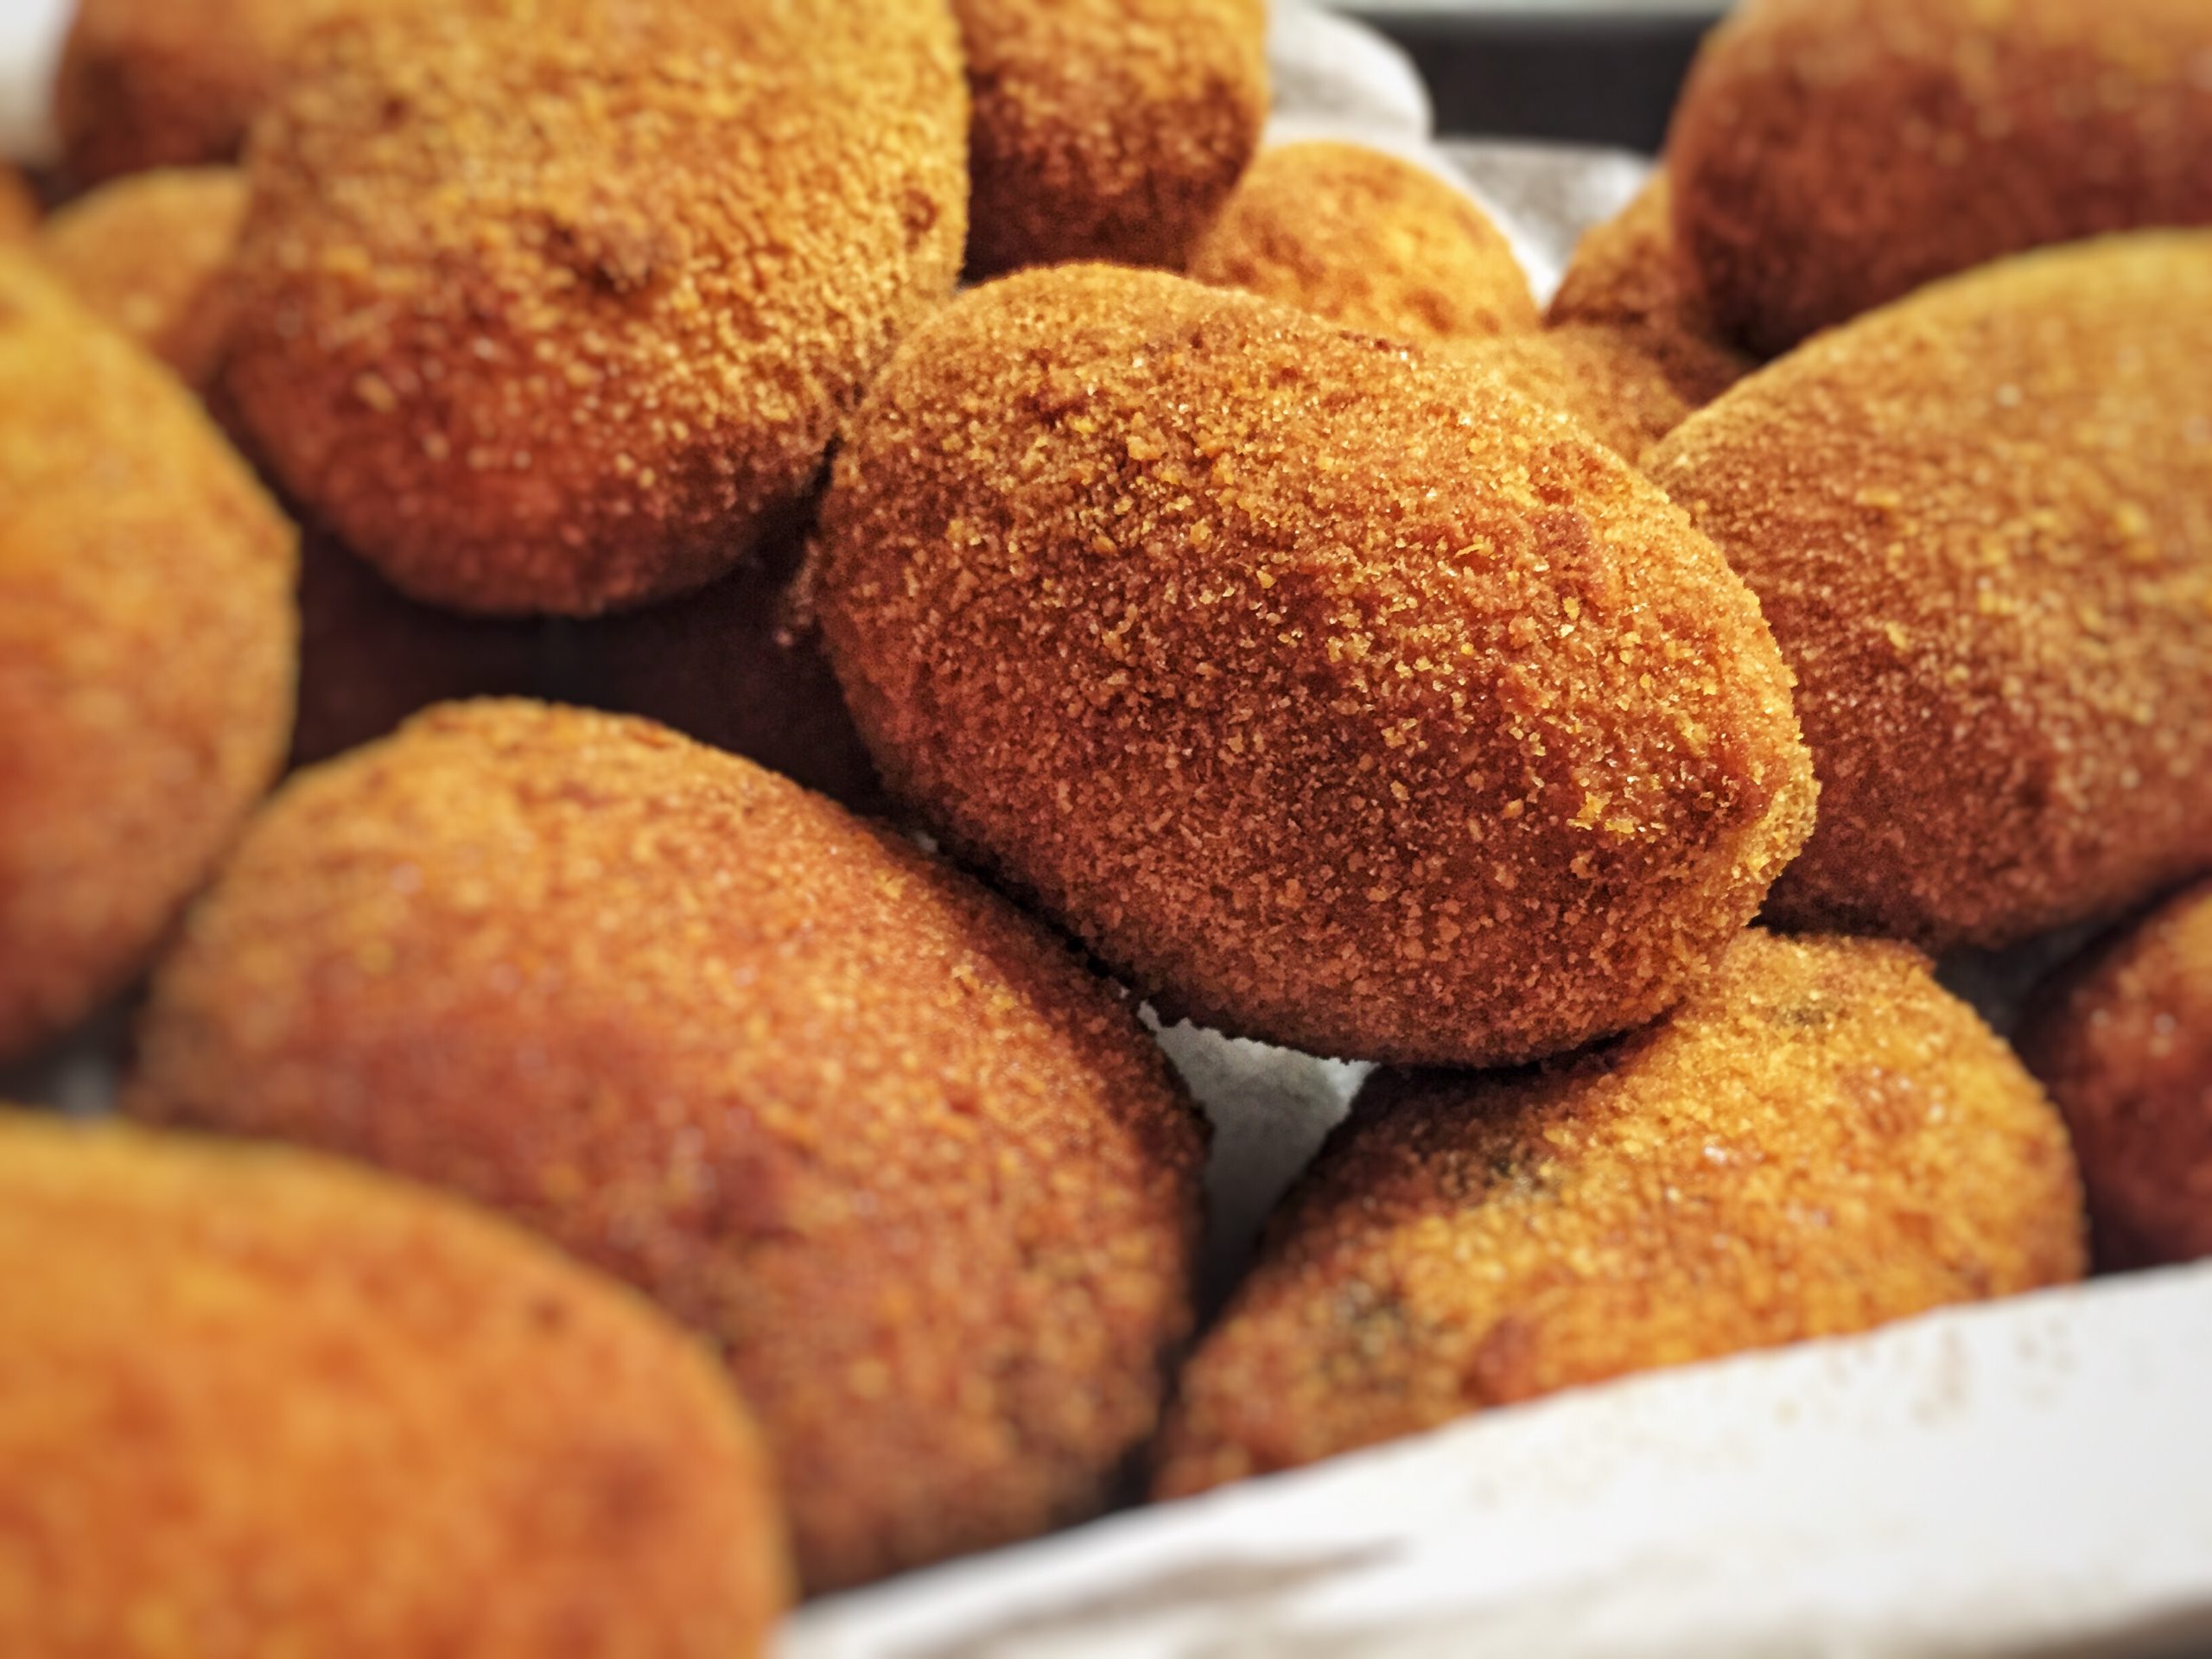 close-up-of-a-group-of-italian-suppl-traditional-fried-rice-balls-filled-with-mozzarella-cheese-and_t20_joY9mj